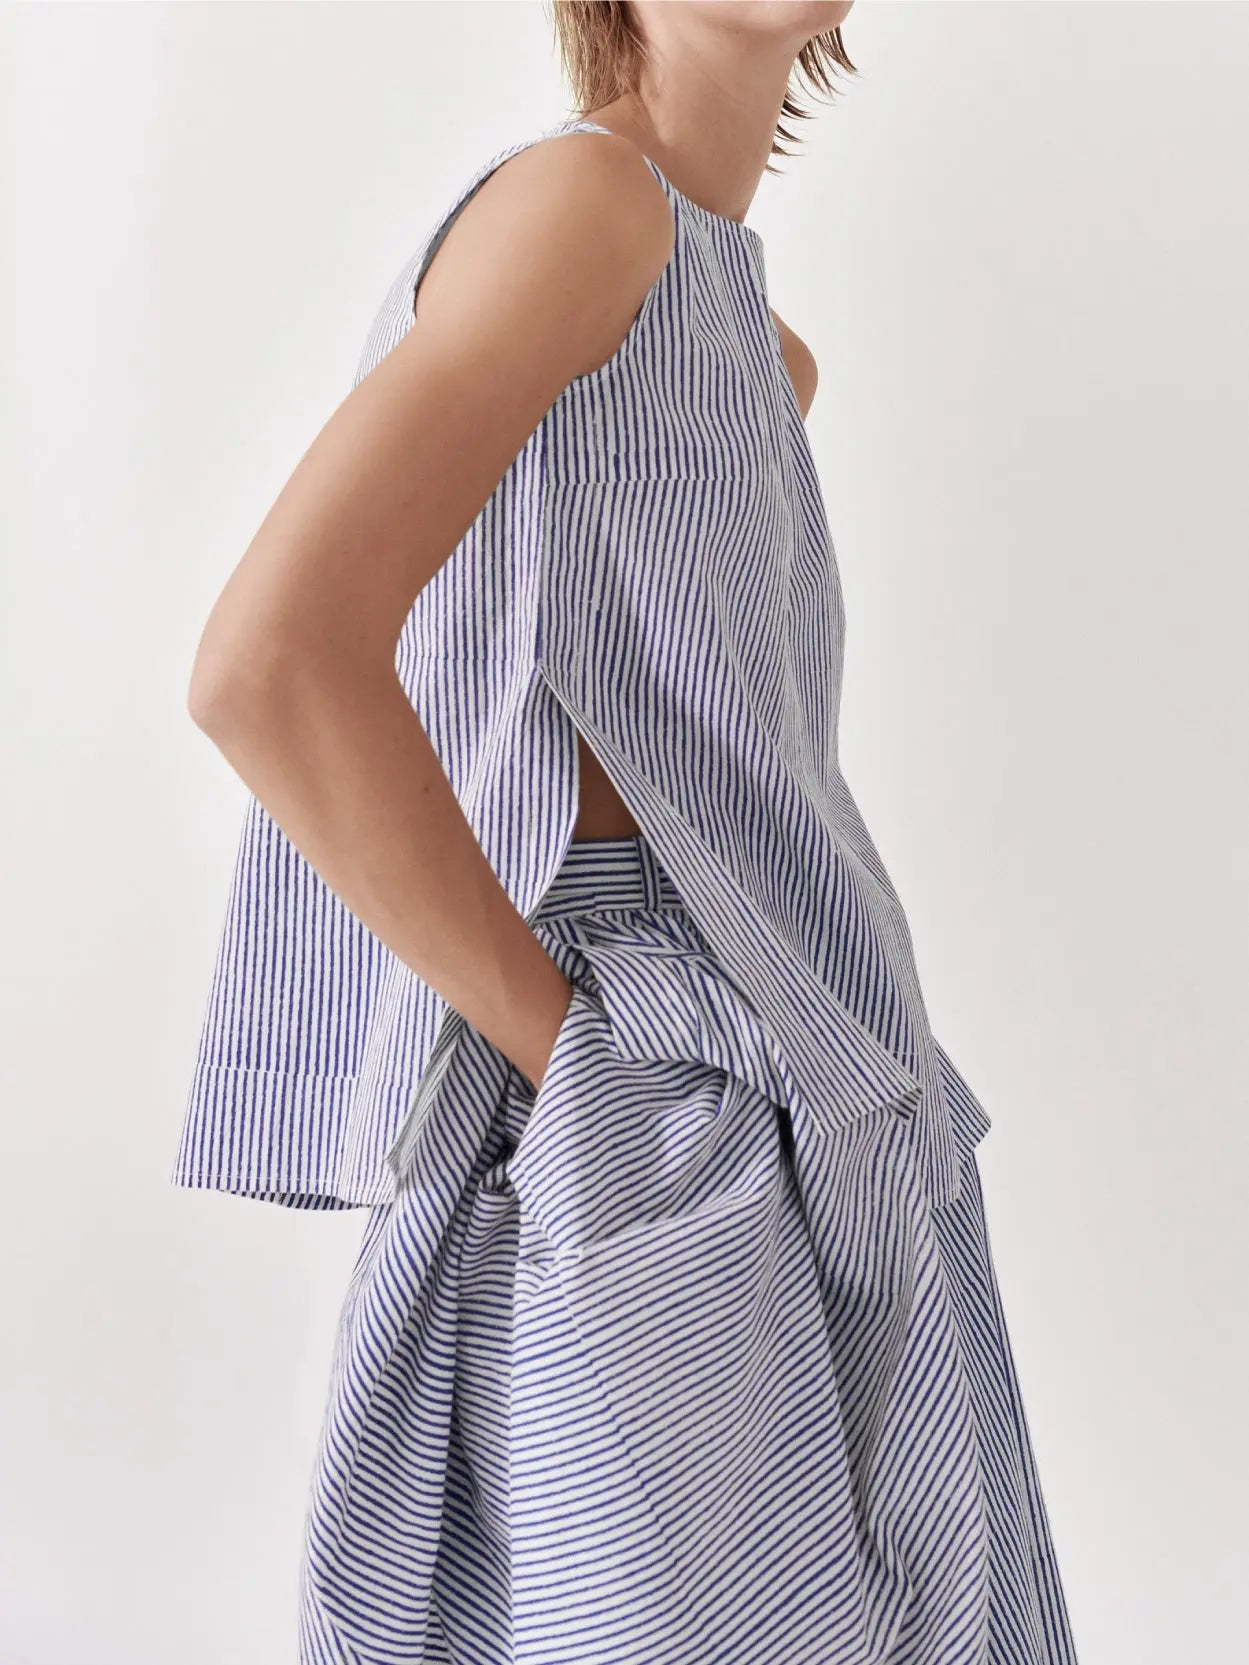 A sleeveless, blue and white vertical striped blouse is displayed on a plain white background. The Louise Top Block Print Stripe by Jan Machenhauer, available at Bassalstore in Barcelona, has a loose fit with a round neckline and a subtle, casual design.